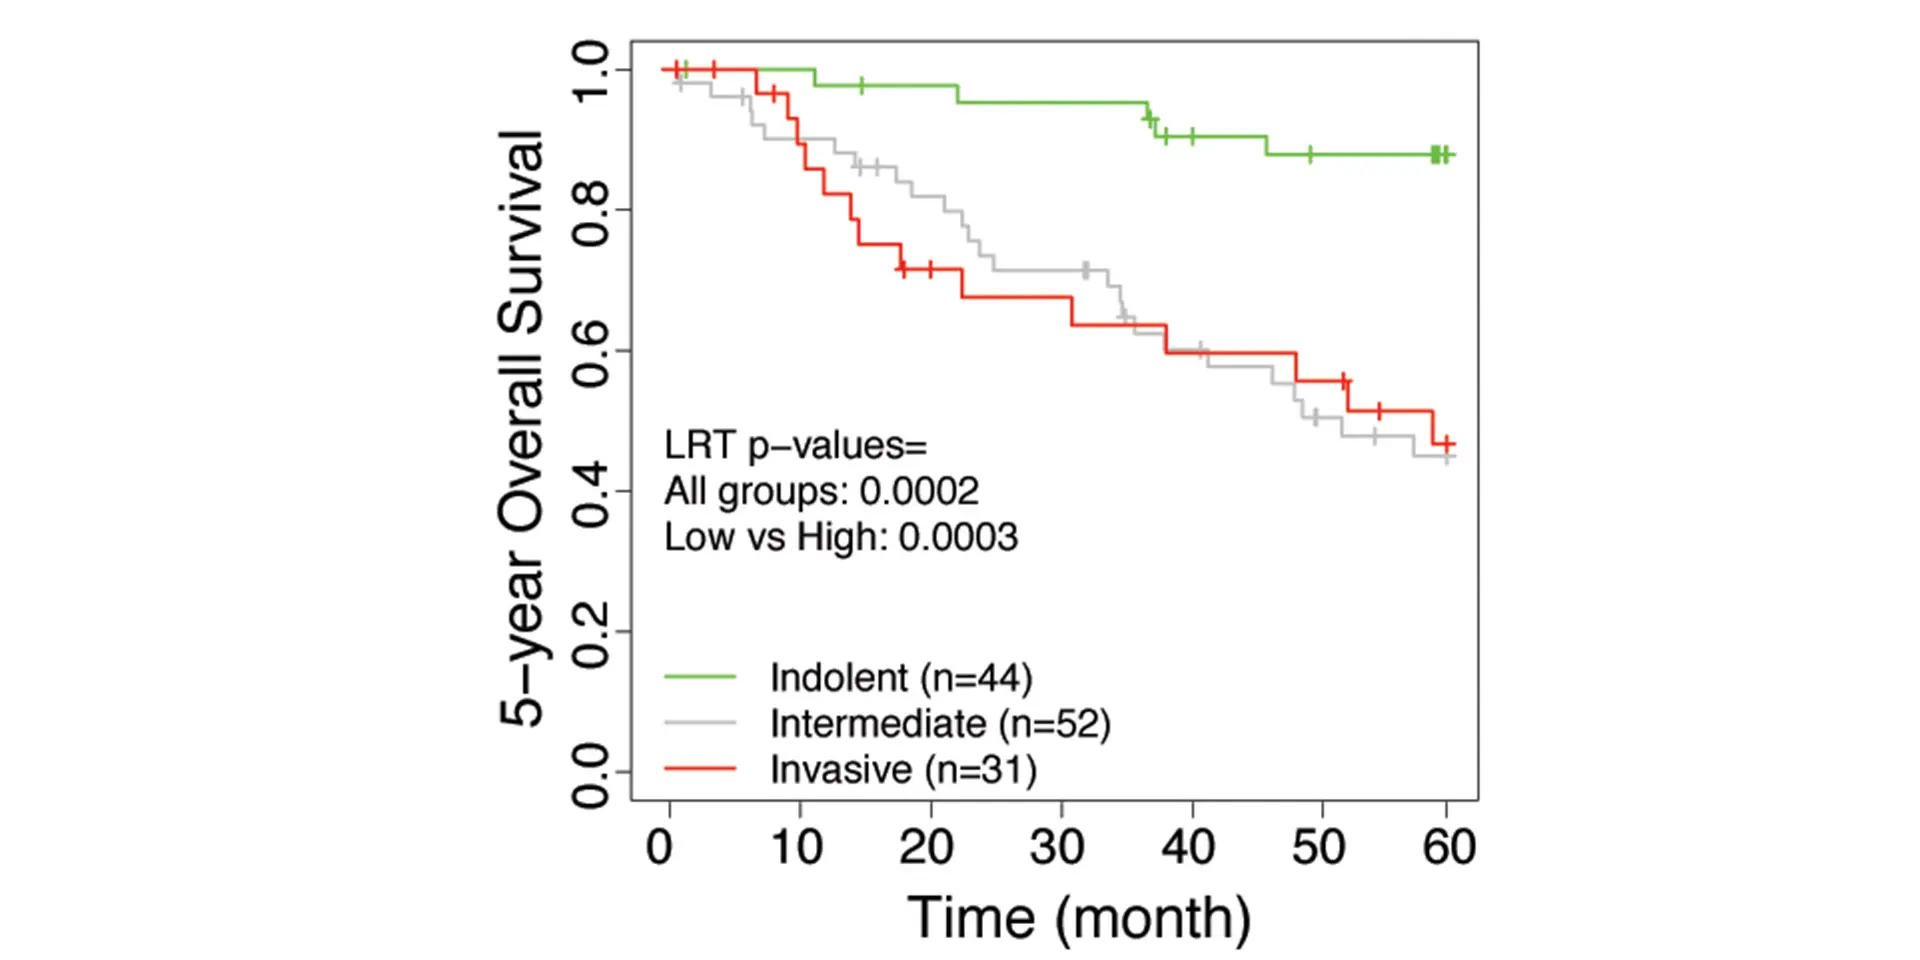 Stratification of tumor samples of each lung adenocarcinoma cohort into three groups based on IVS; invasive (high IVS), intermediate (middle IVS), and indolent (low IVS) tumors. Five-year survival of tumors was shown in a KM curve with corresponding LRT p-values. e) Der et al.